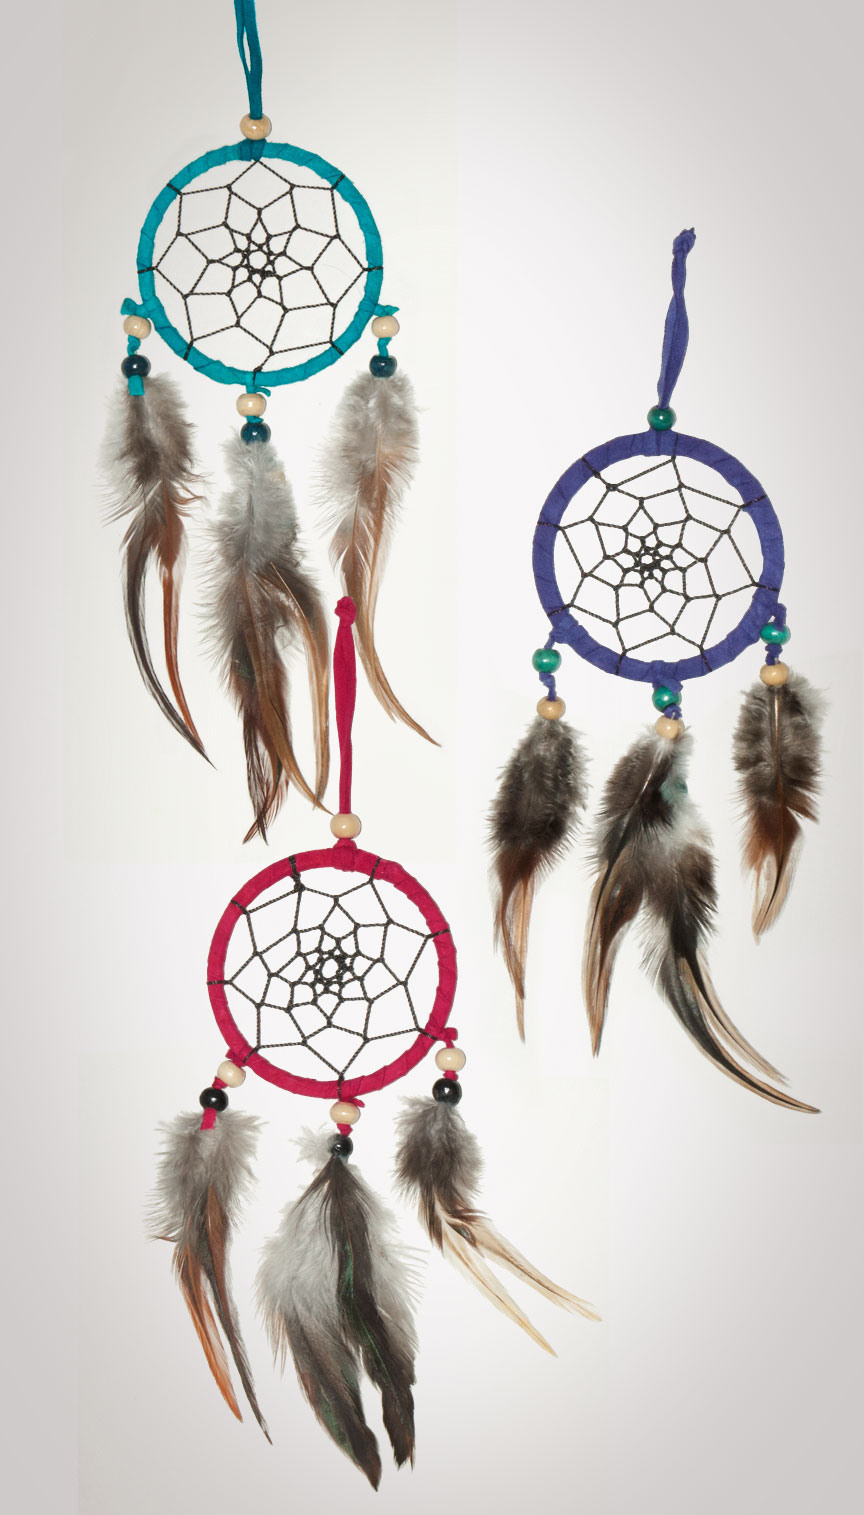 A dream catcher set iof three colors: Red, Blue, & Teal, and are adorned with complimentary beads and brown/gray feathers.